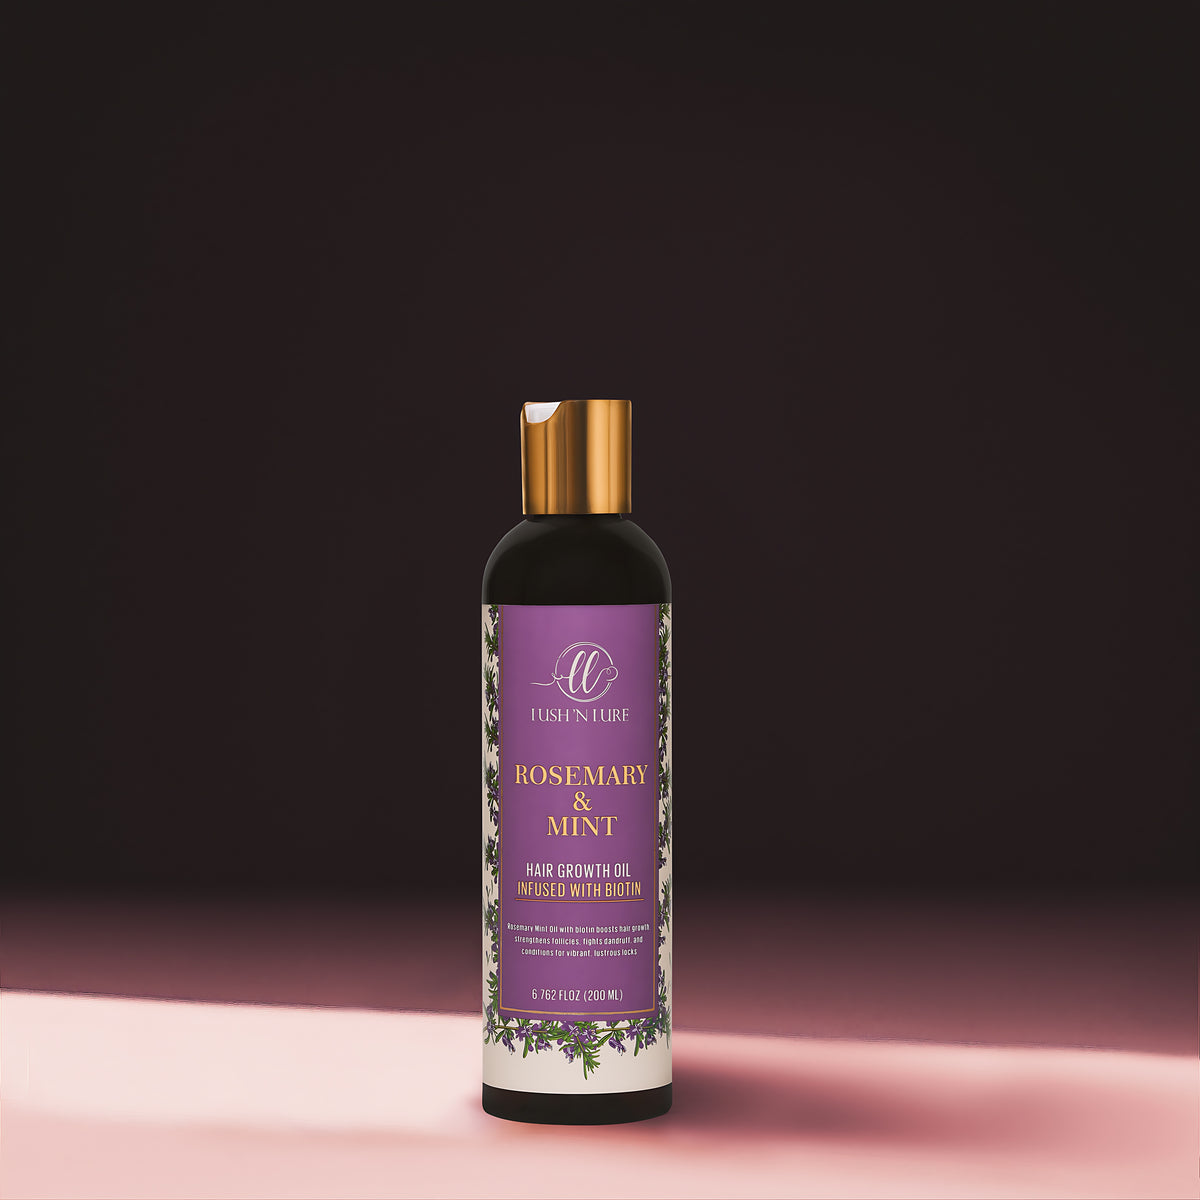 Bottle of LUSH 'N LURE Rosemary & Mint Oil, a natural remedy for hair fall and scalp health